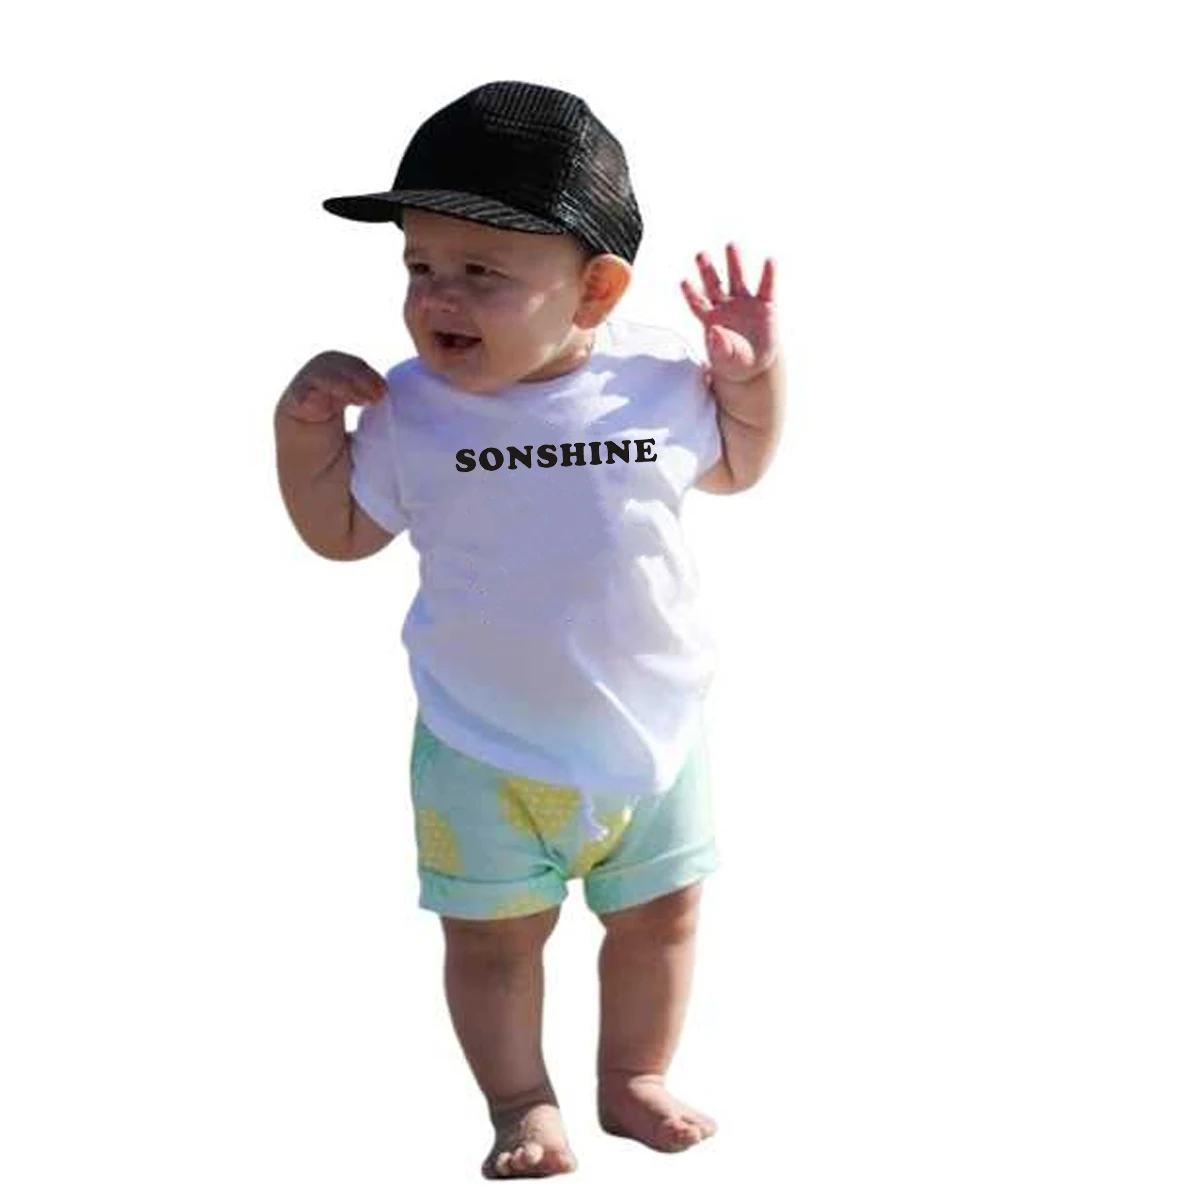 Funny print 100%cotton t shirt kids shirt summer tops kids t shirt graphic tees gift for son